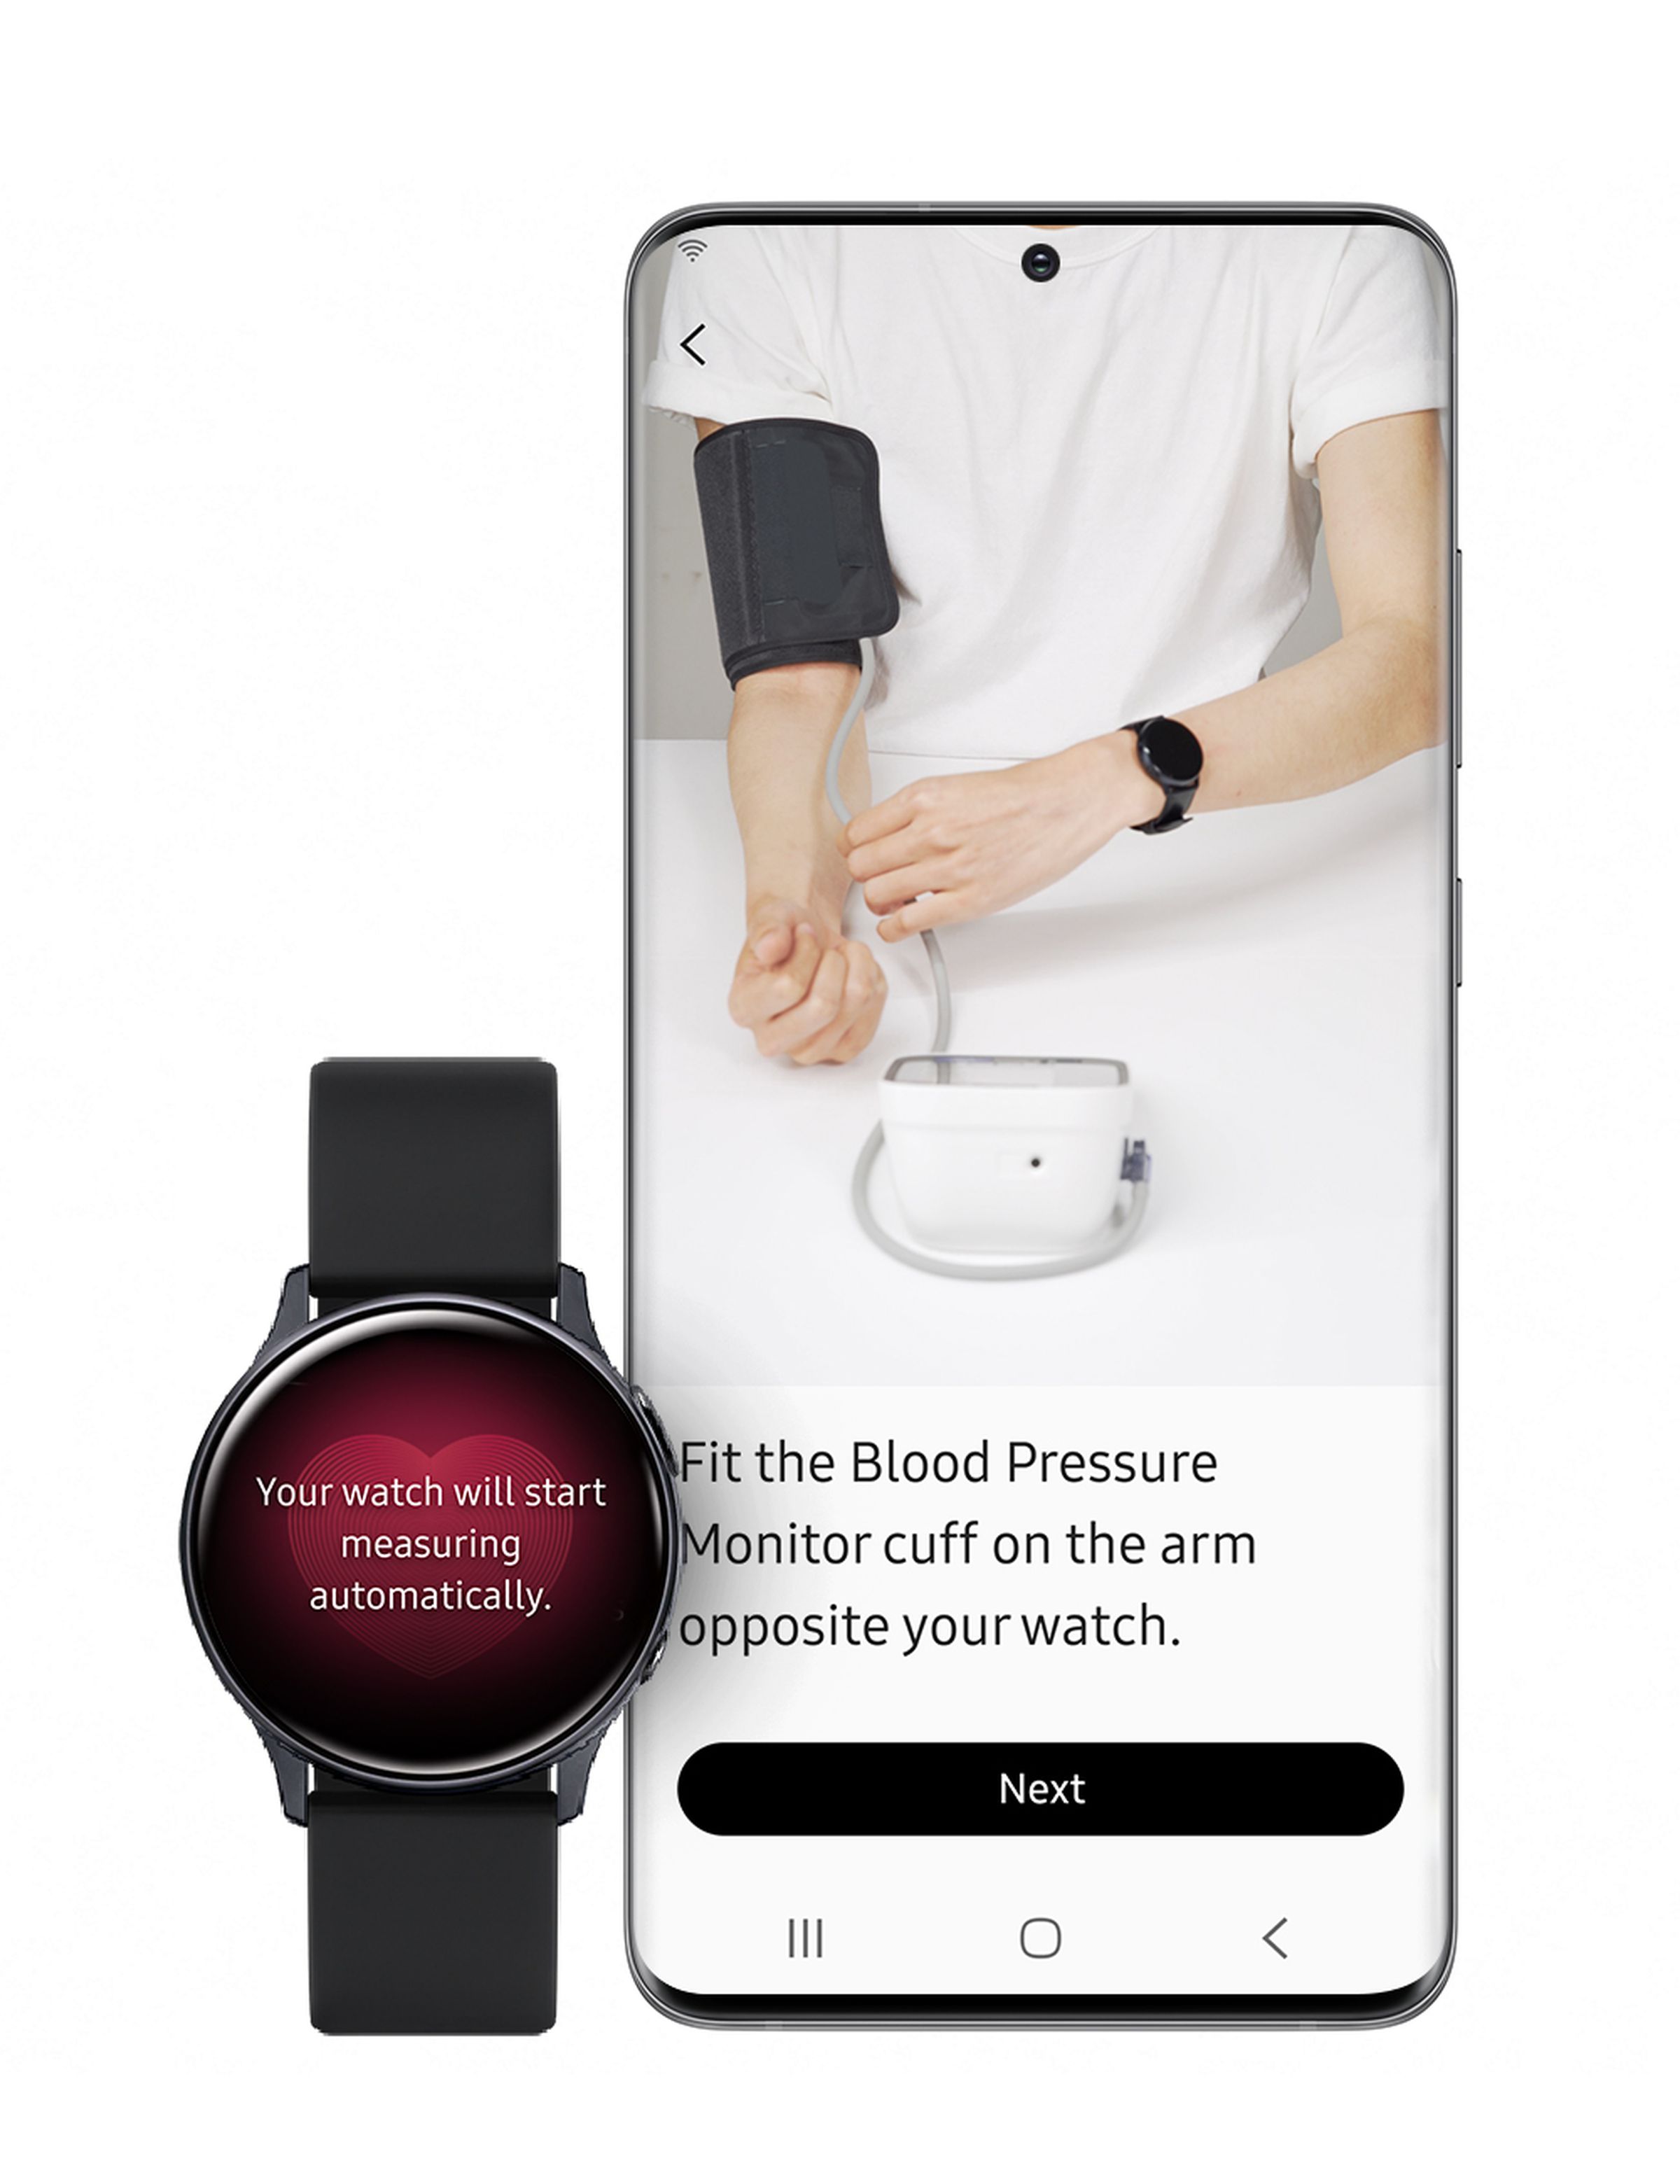 A watch sits next to a phone in a photo illustration. The watch has an image of a heart, and text that says “your watch will start measuring automatically” The phone displays a photo of a person wearing a white shirt. One of the person’s arms has a watch, the other has a blood pressure cuff.